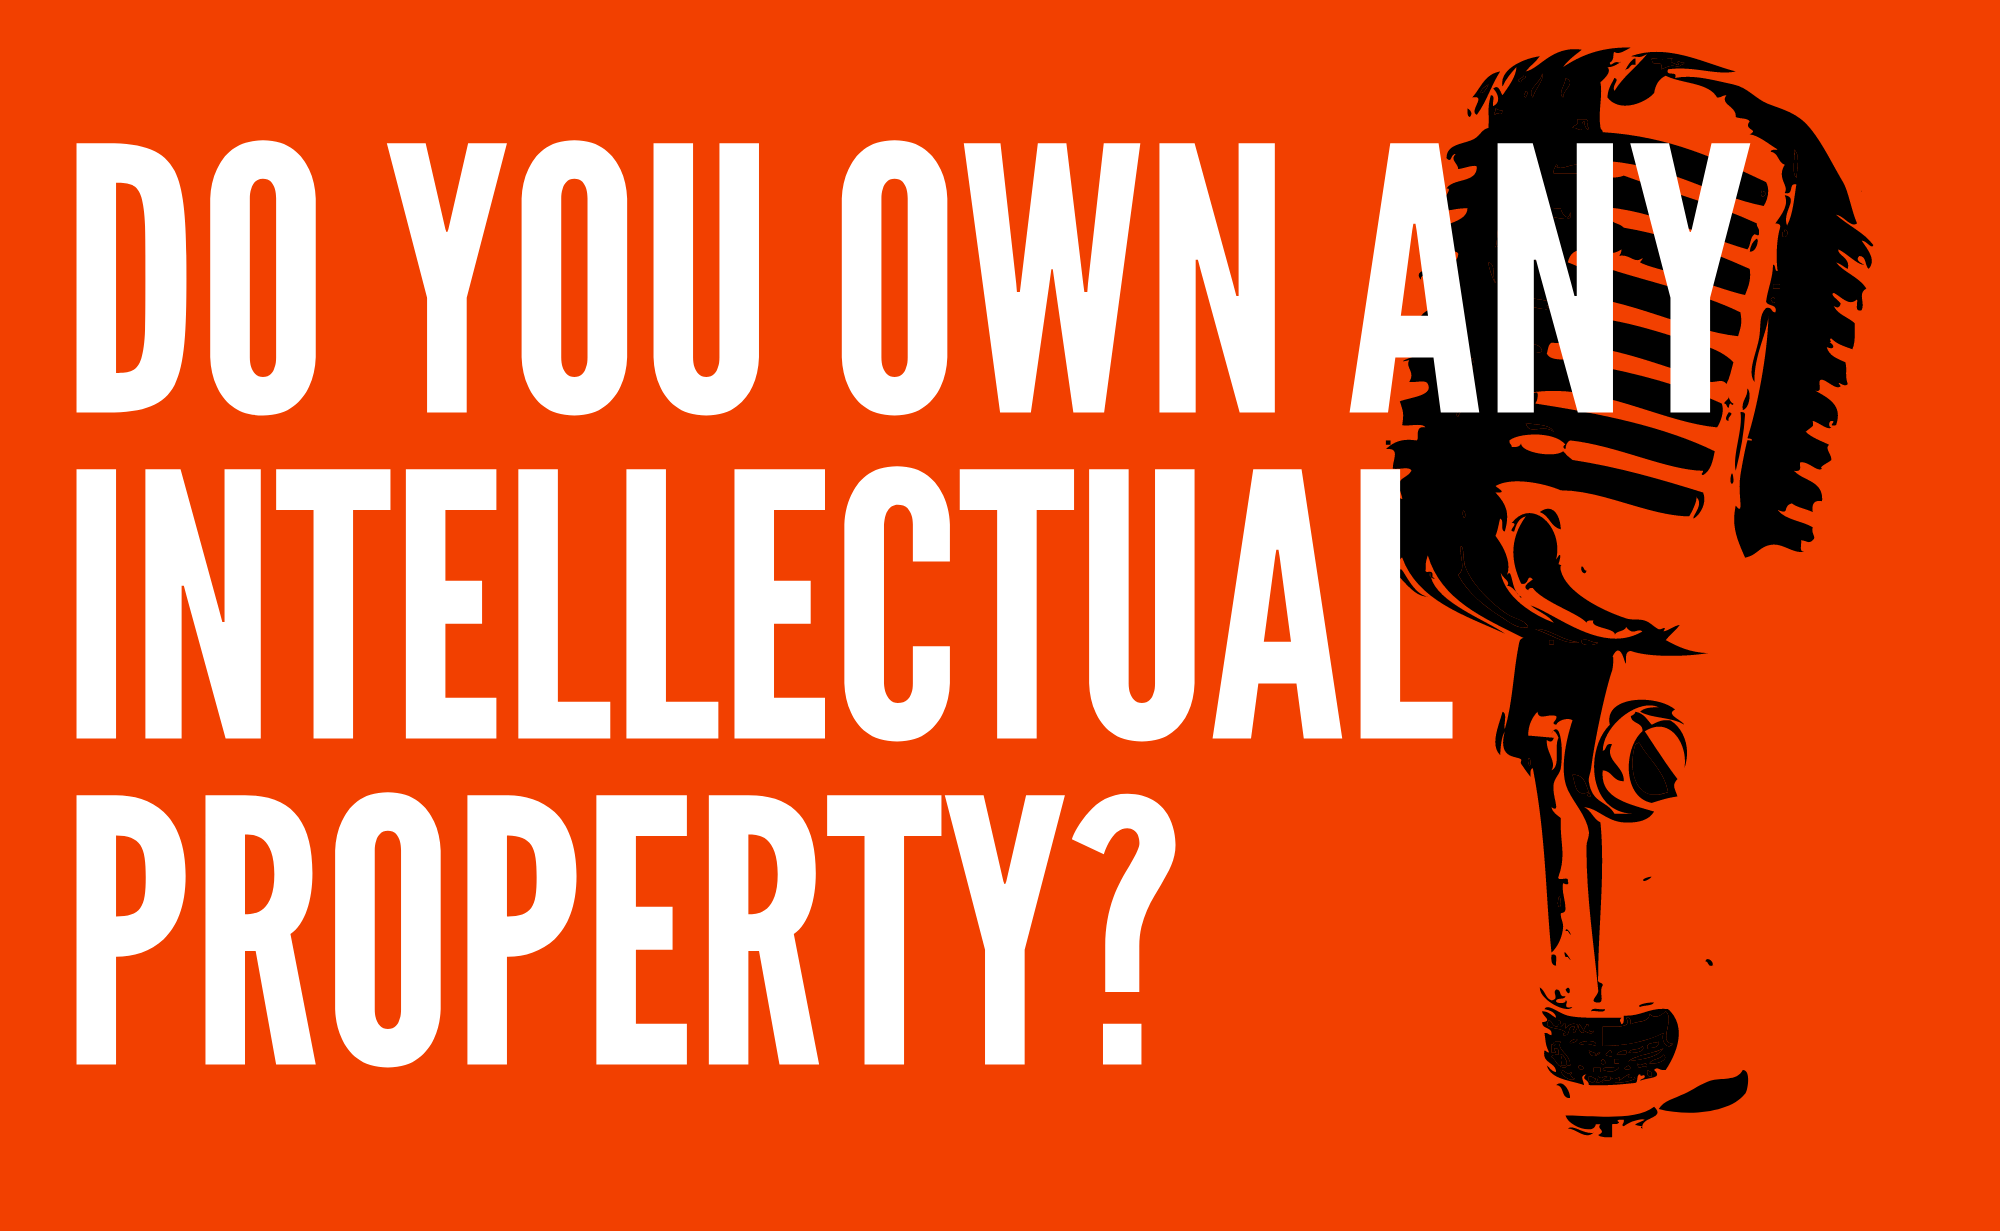 After The Pitch - Do you own any intellectual property